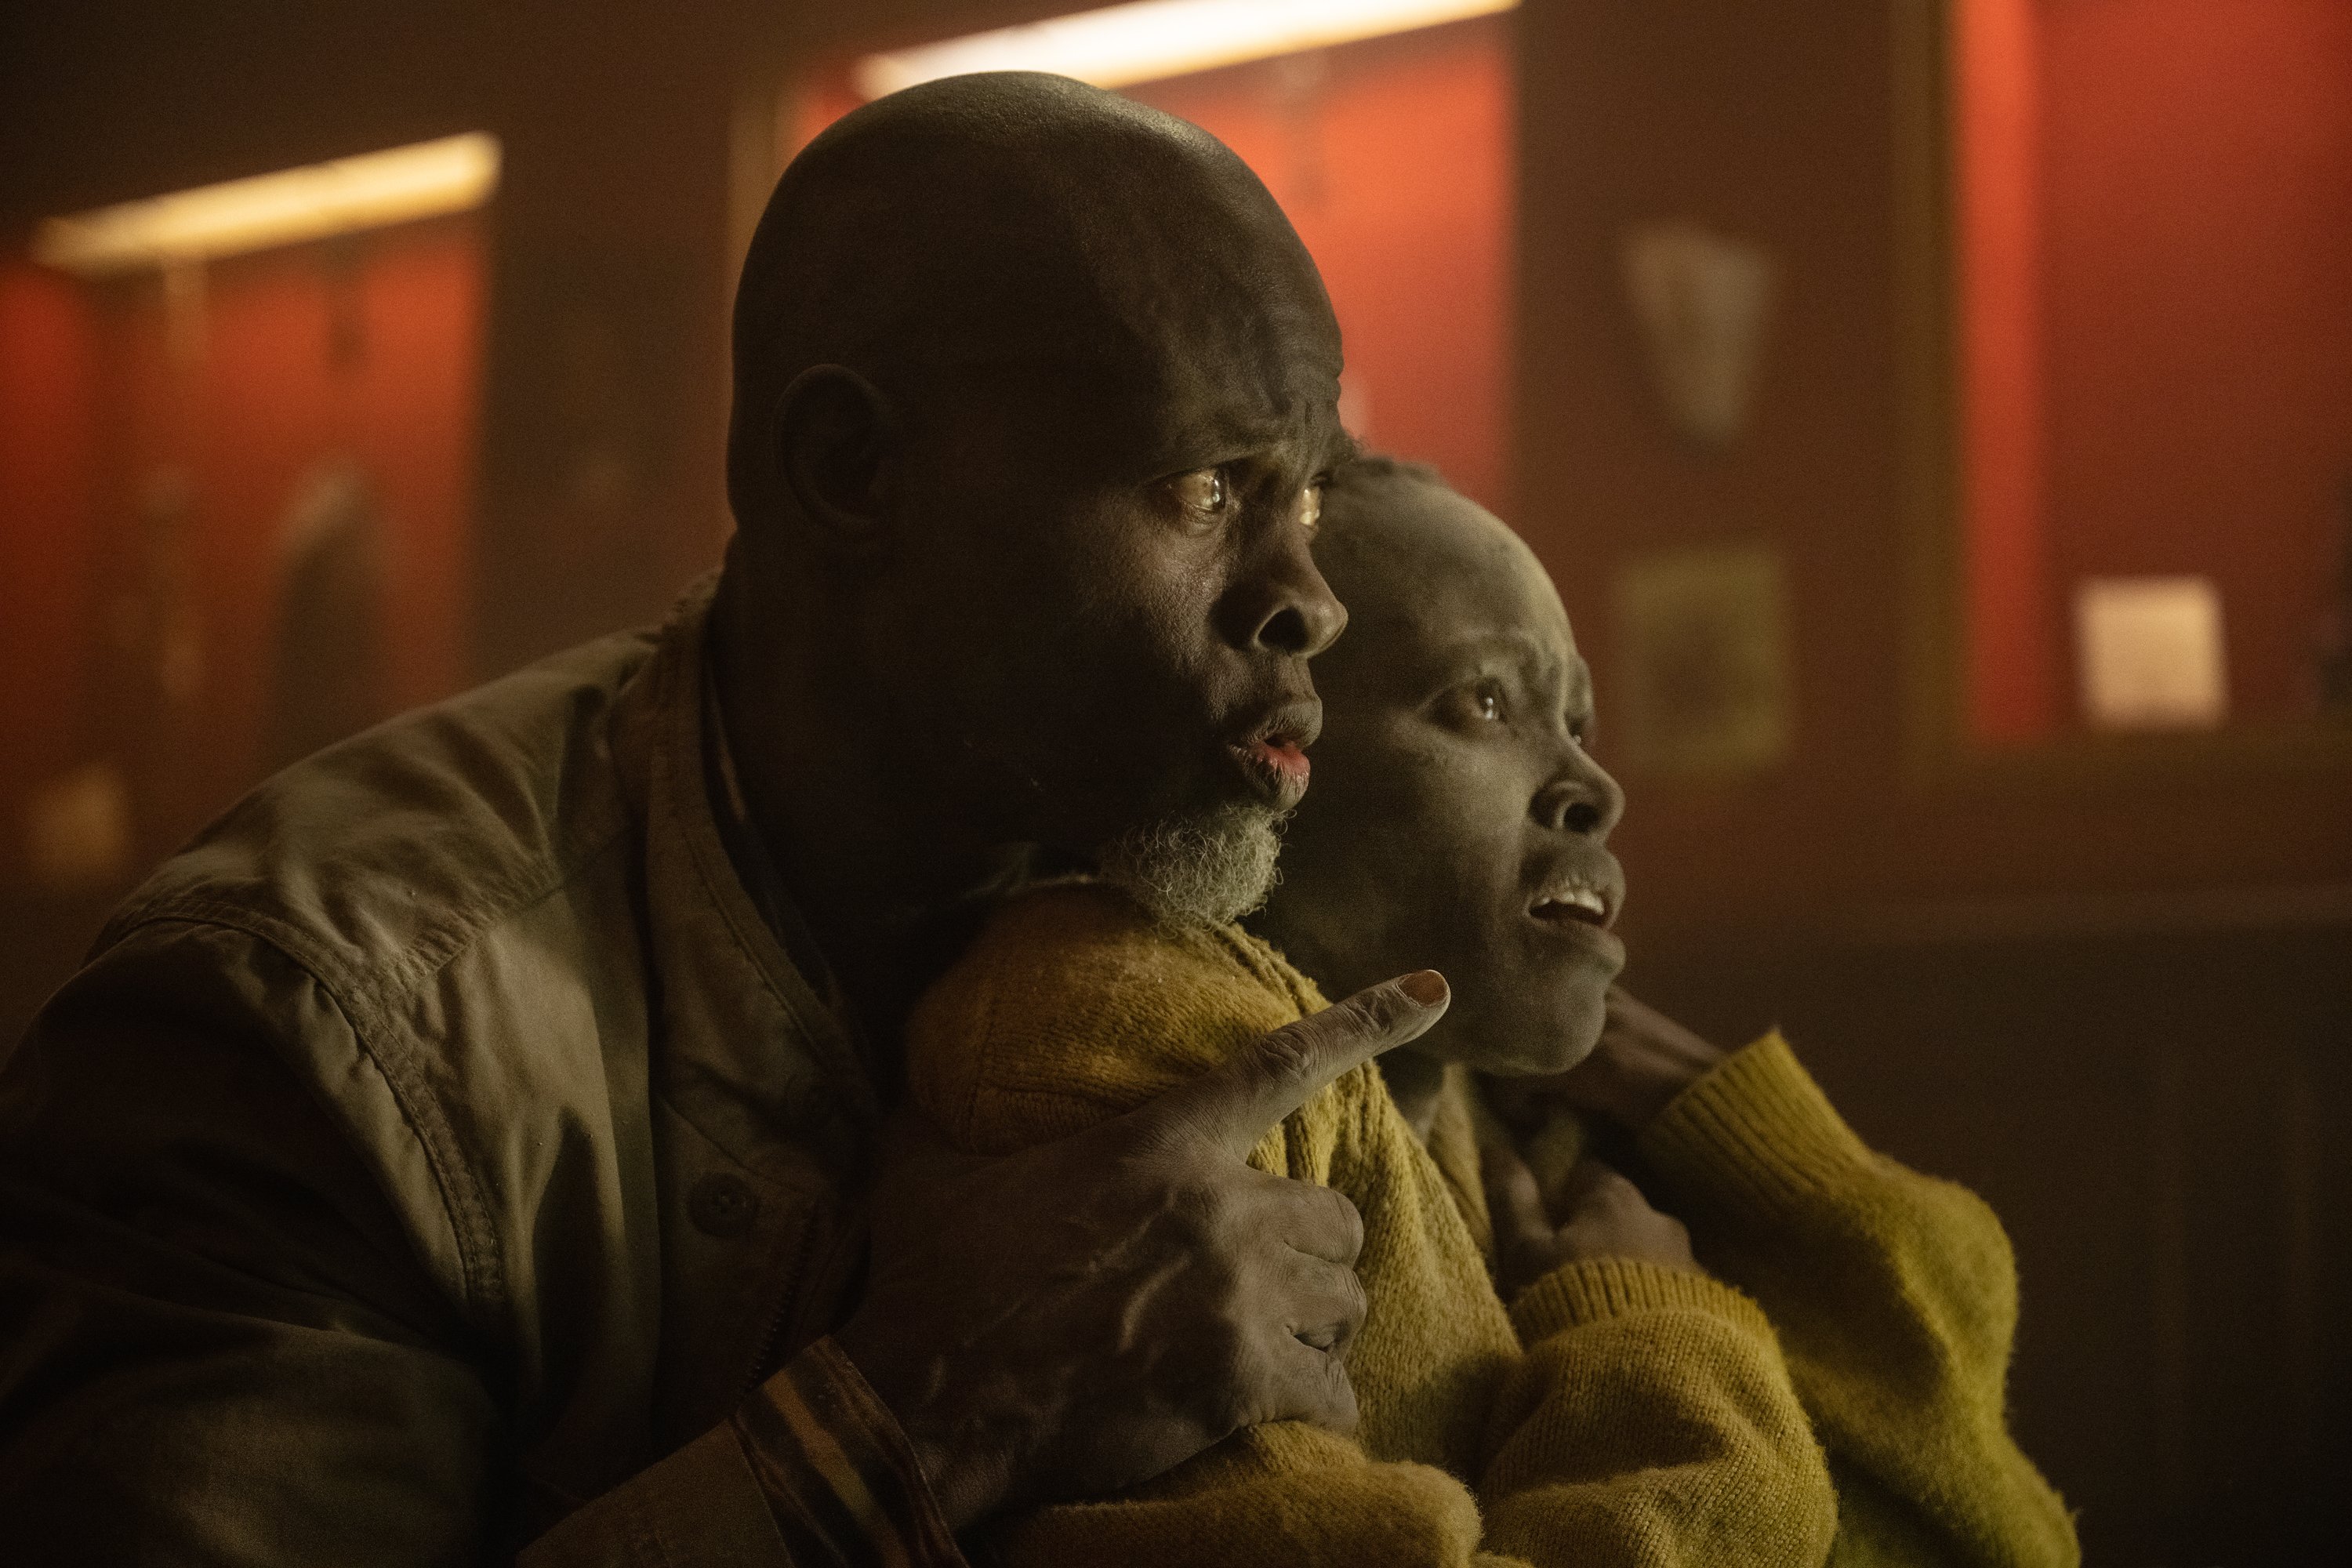 Djimon Hounsou as “Henri” and Lupita Nyong’o as “Samira” in A Quiet Place: Day One from Paramount Pictures.